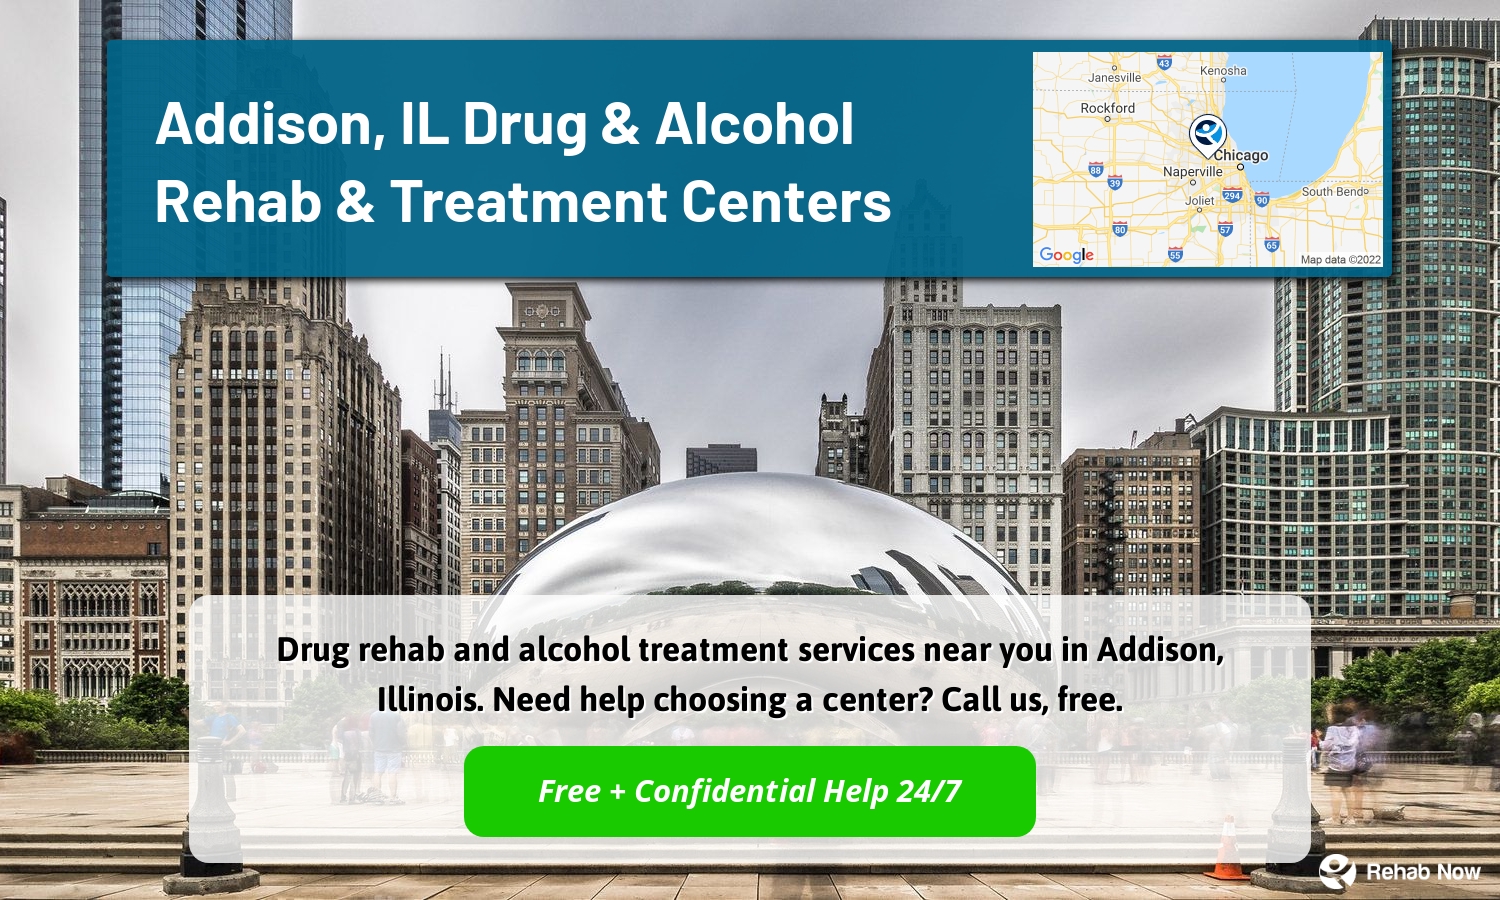 Drug rehab and alcohol treatment services near you in Addison, Illinois. Need help choosing a center? Call us, free.